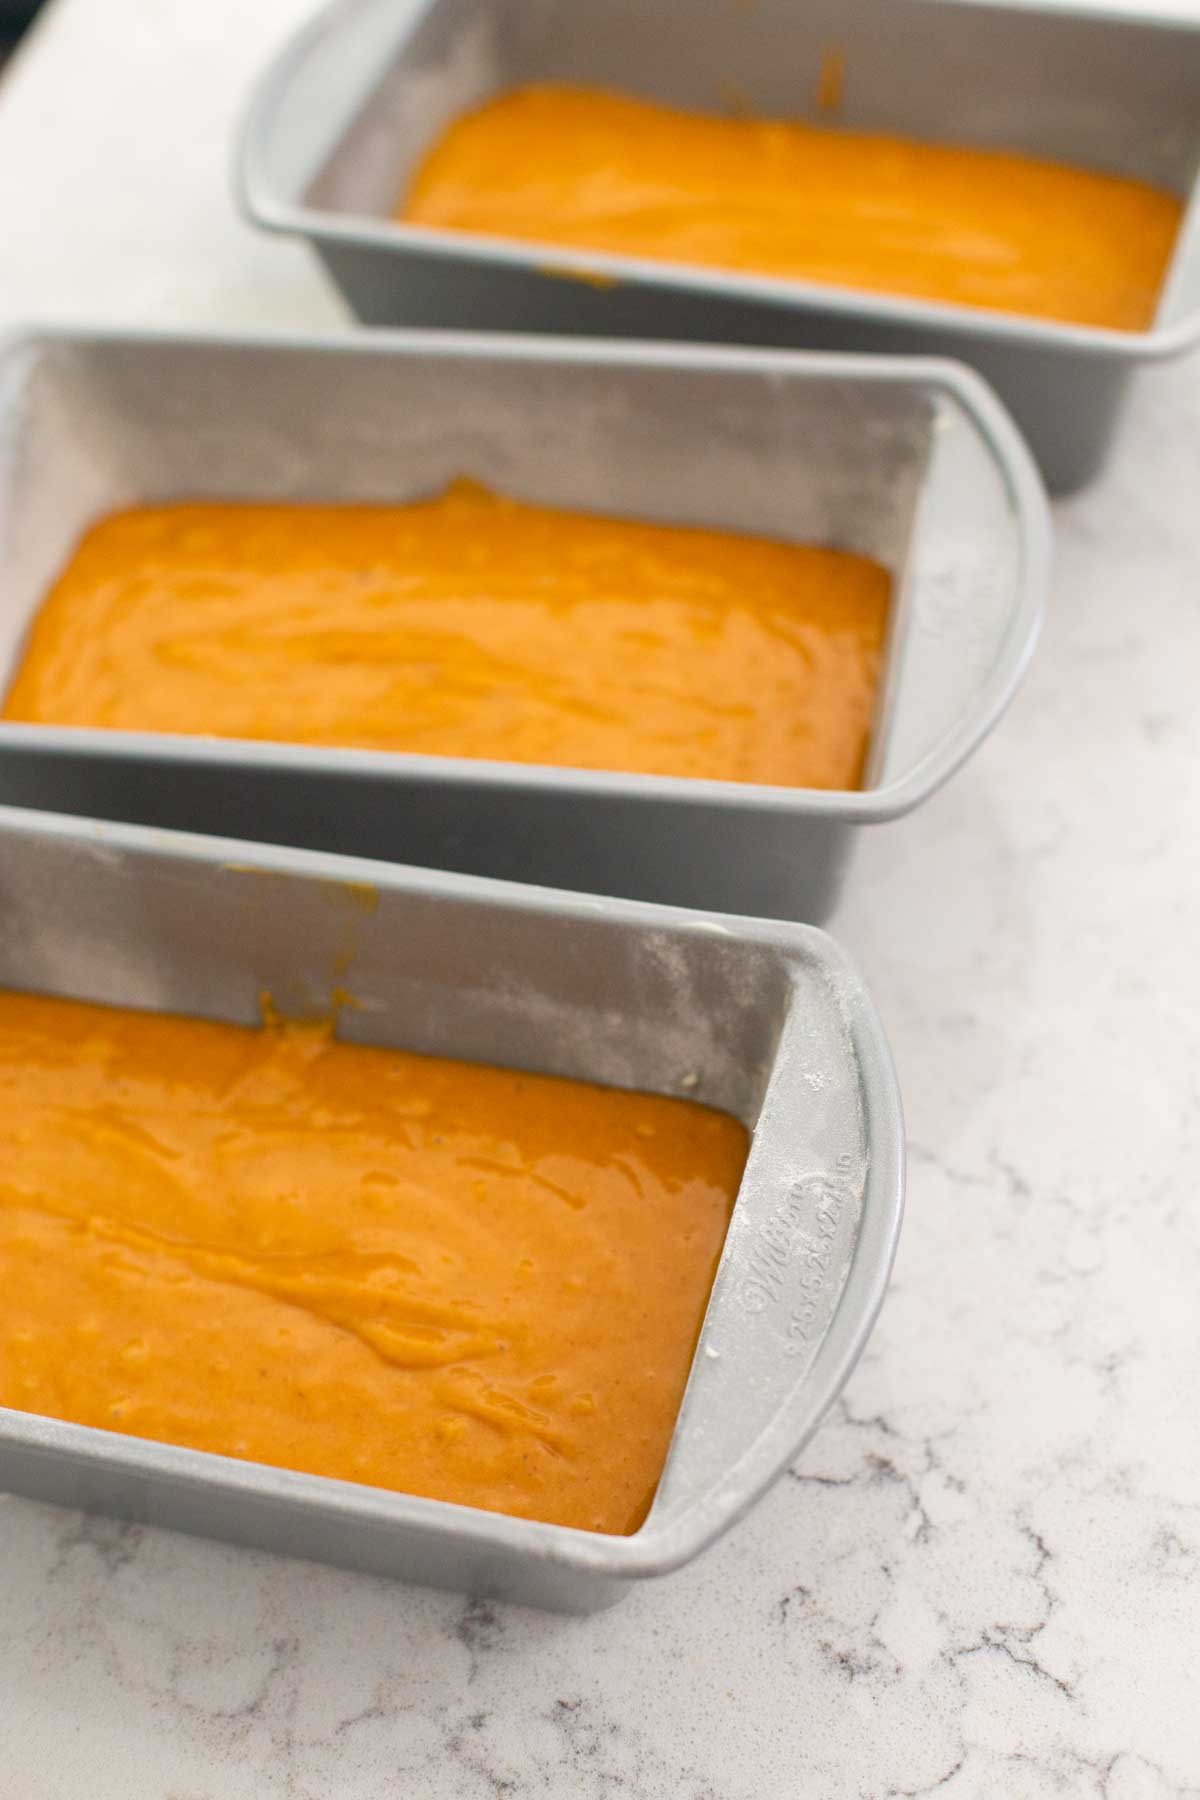 The 3 pans are filled evenly with pumpkin bread batter.